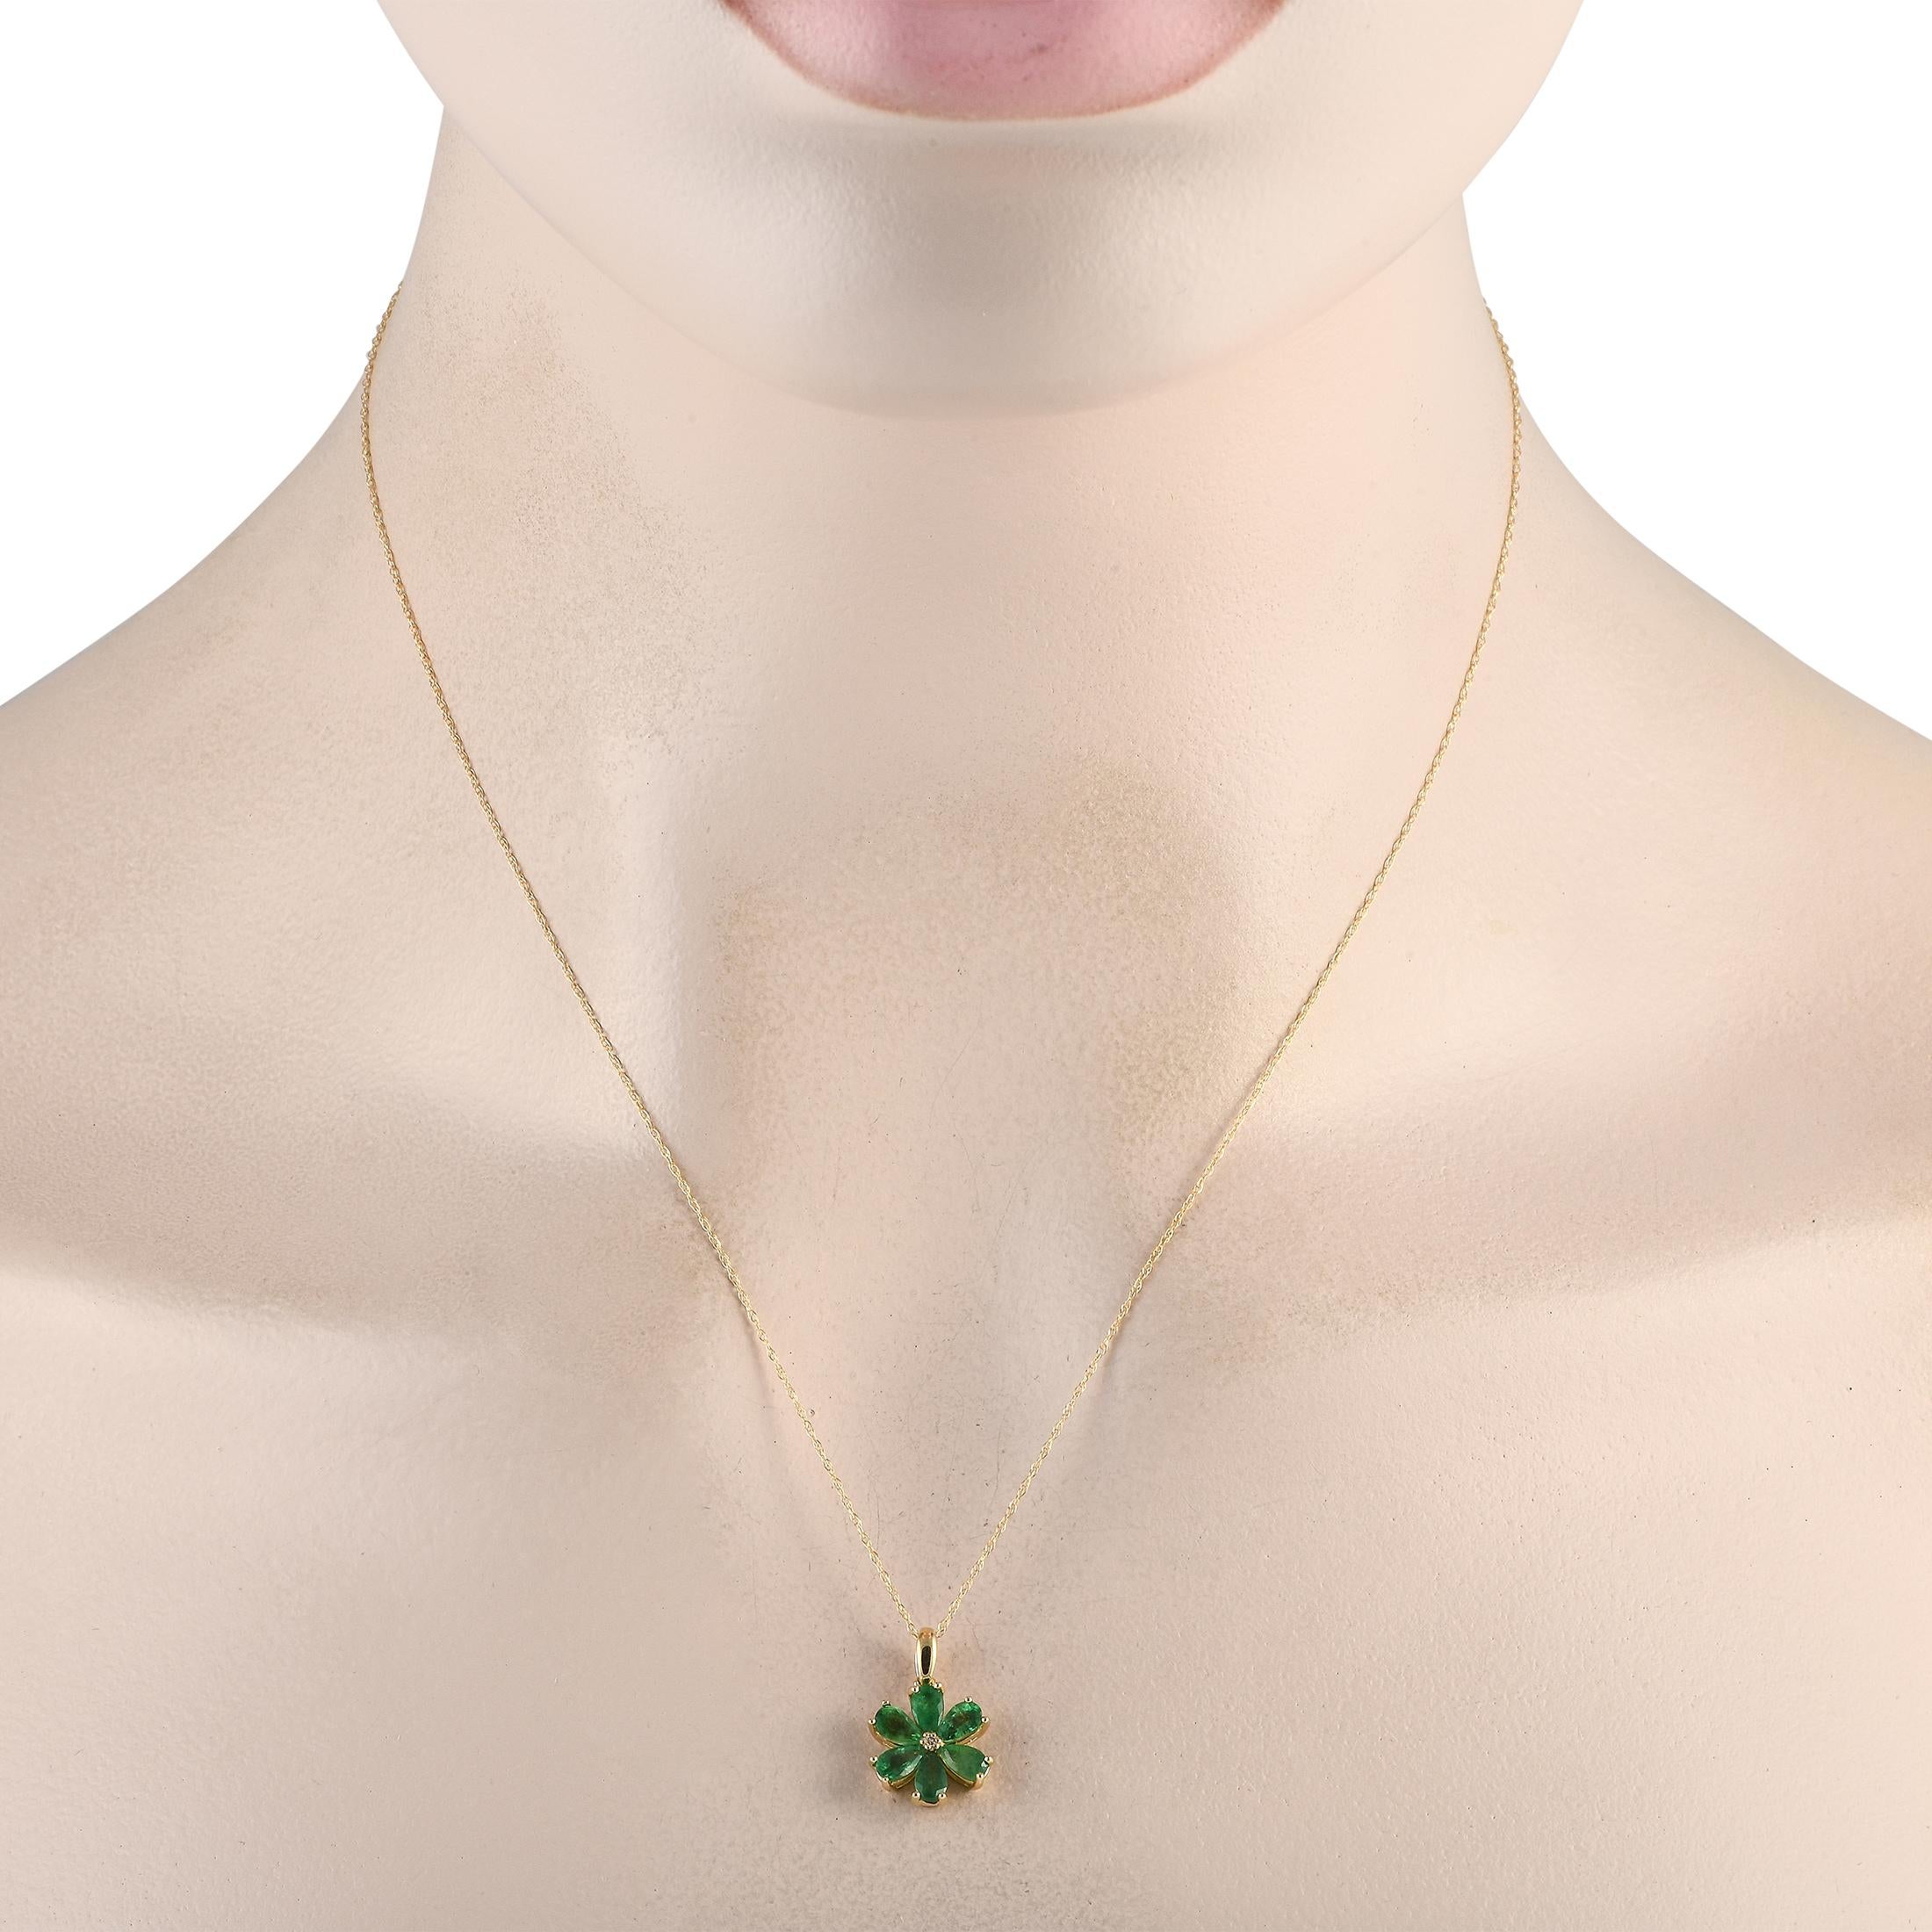 A floral shaped pendant makes a statement on this simple, elegant necklace. Crafted from 14K yellow gold, the pendant comes to life thanks to radiant emerald petals and a single 0.01 carat diamond stone at the center. It measures 0.75 long by 0.50